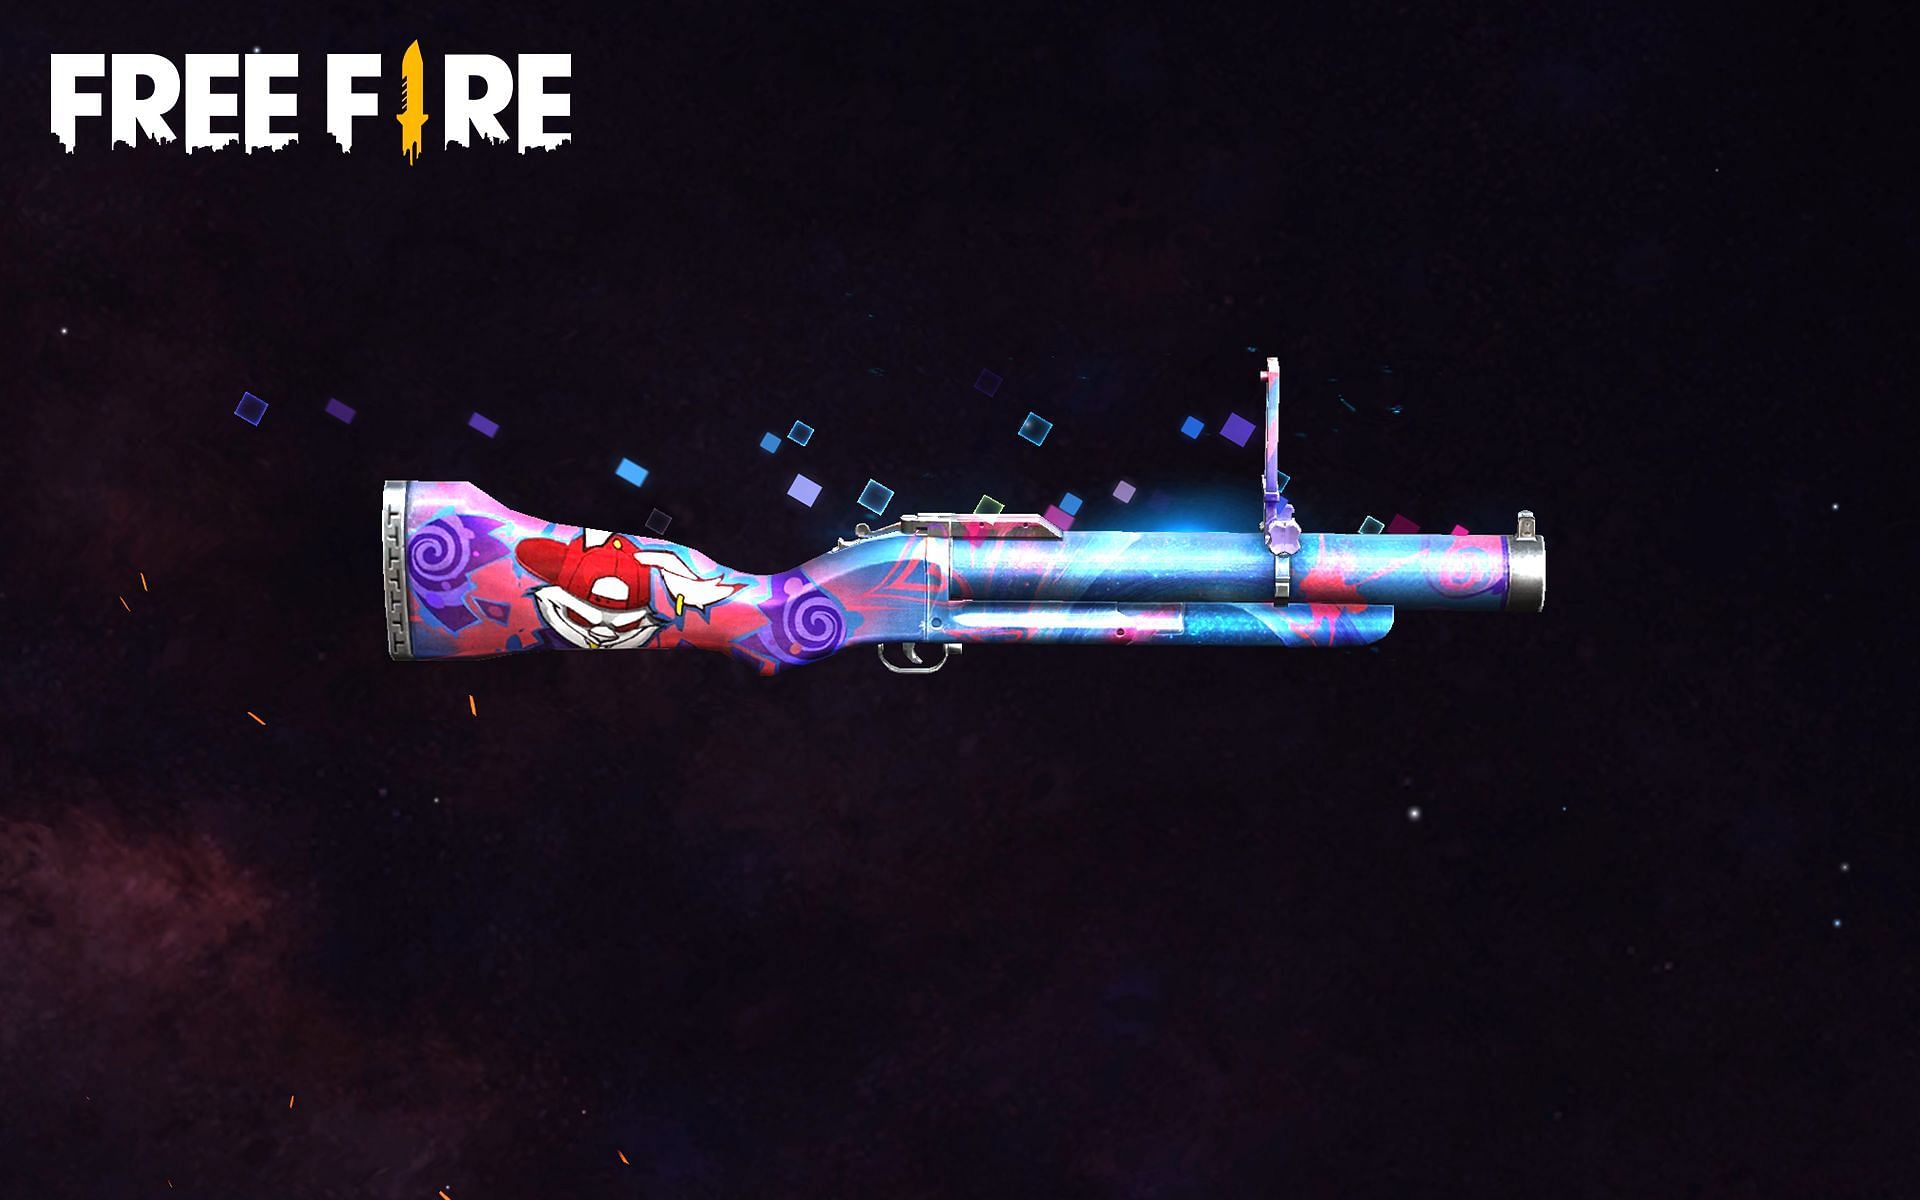 Gamers can get this gun skin in Free Fire by opening the crate (Image via Garena)